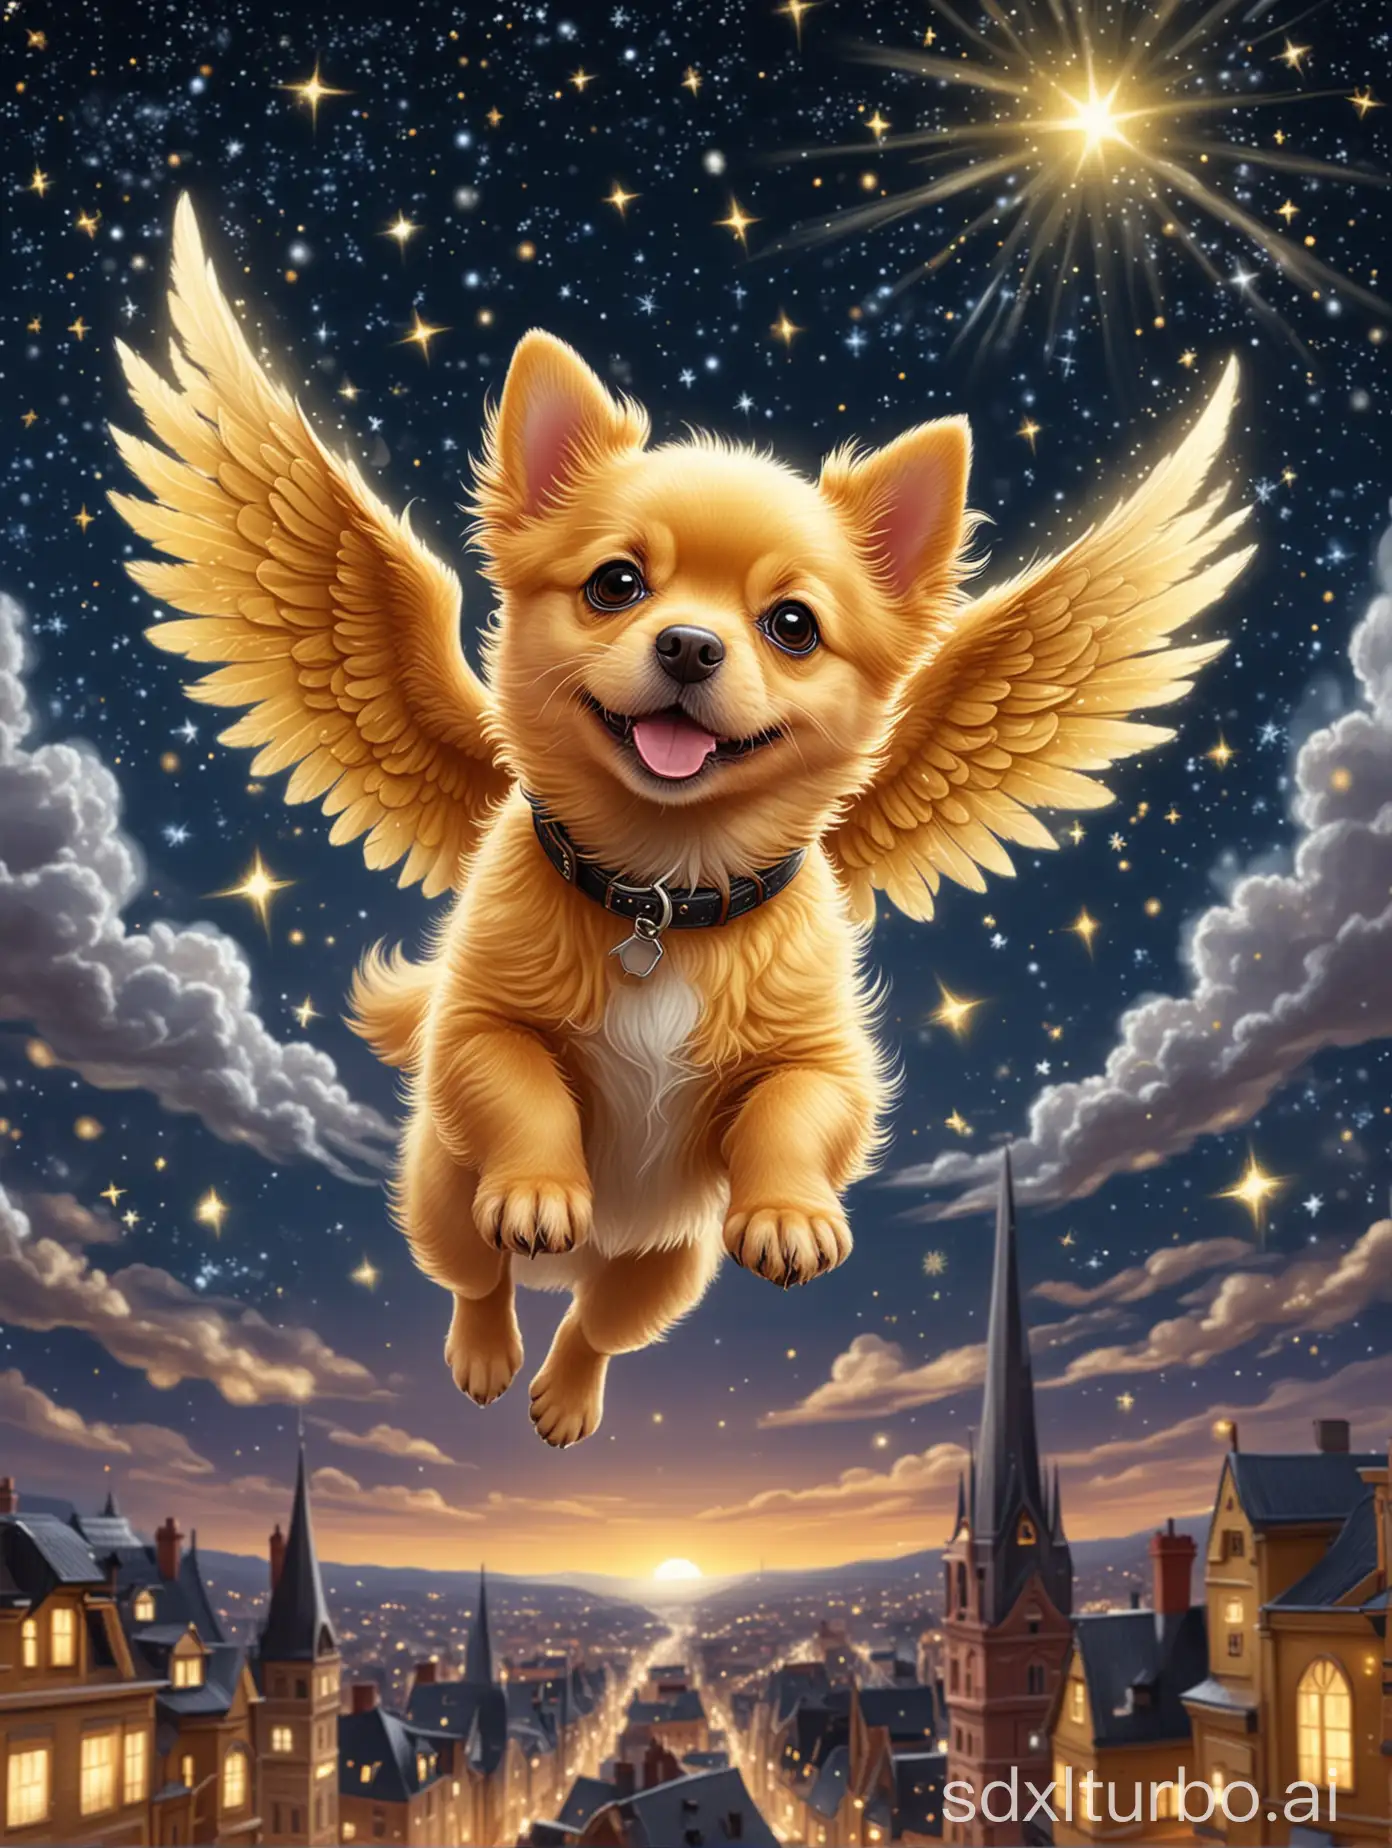 Adorable-Flying-Yellow-Dog-with-Wings-Over-a-Bright-Starry-City-Sky